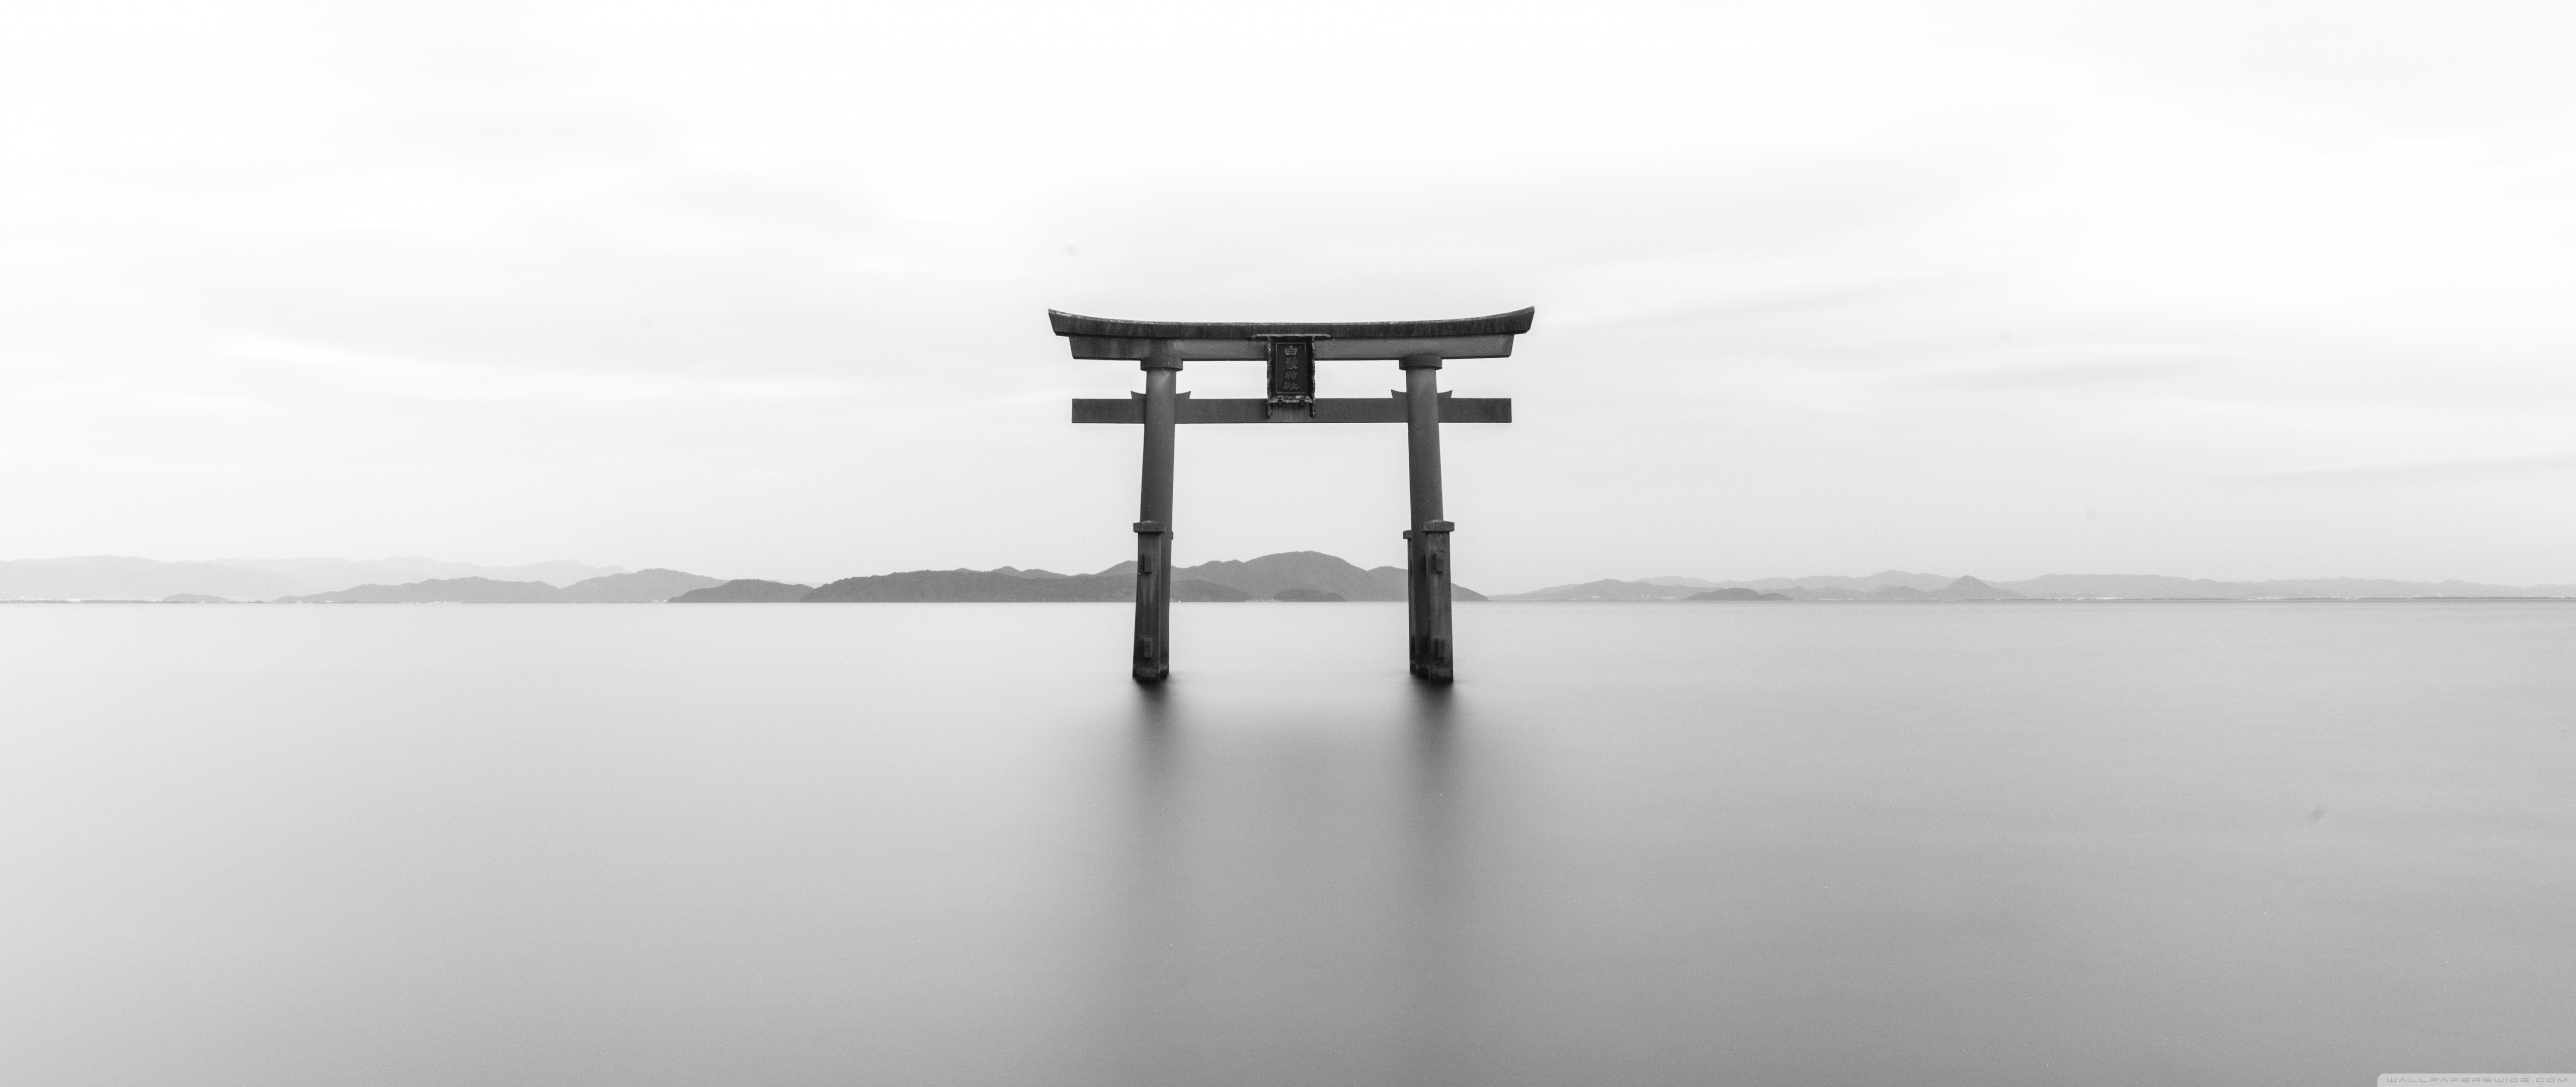 General 5120x2160 white torii hazy calm waters monochrome outdoors sky water sea overcast clouds